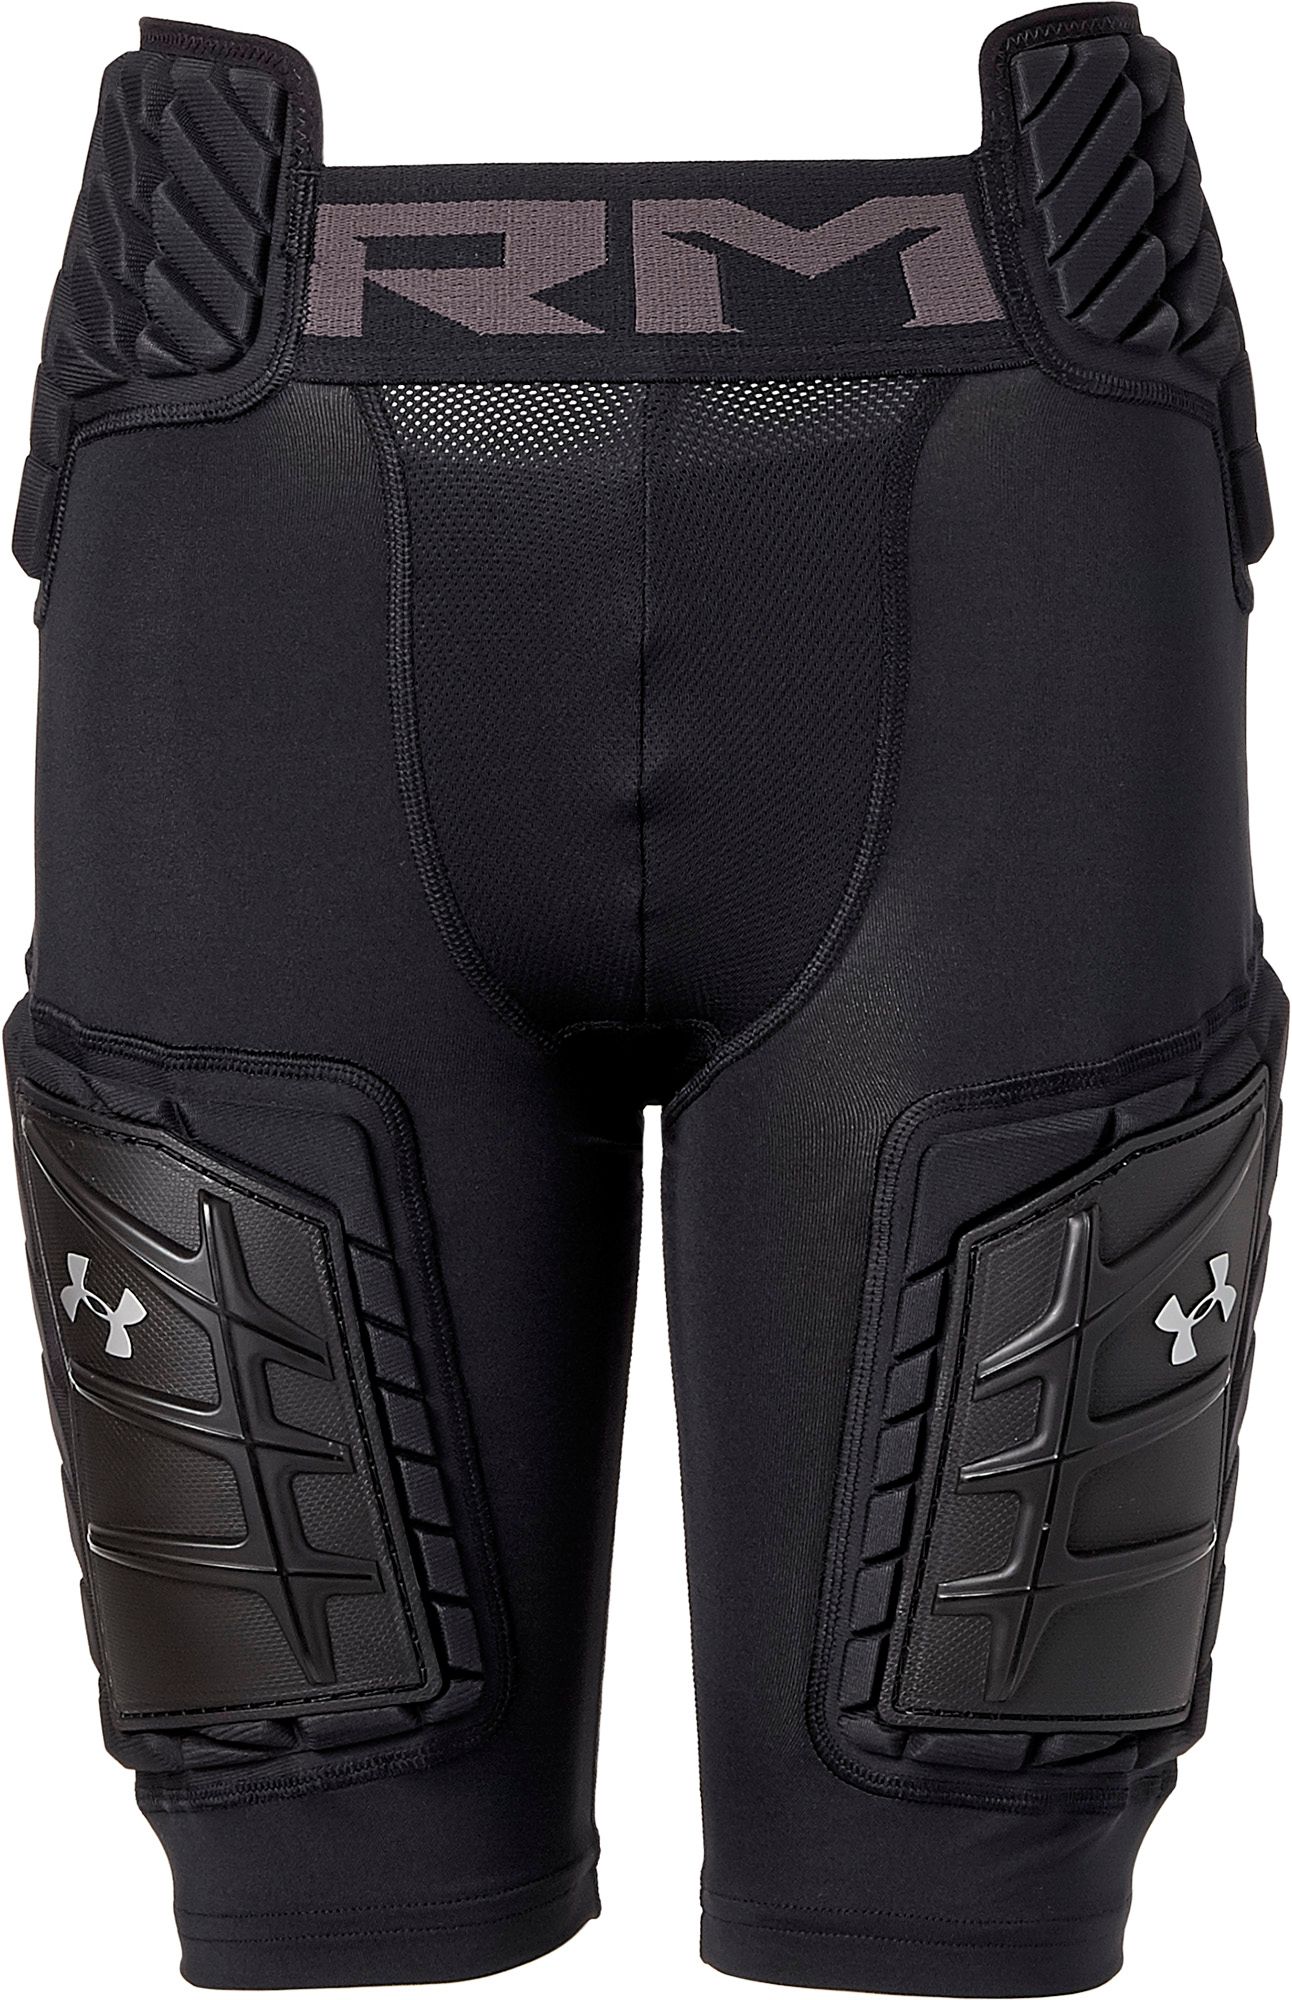 under armour padded pants